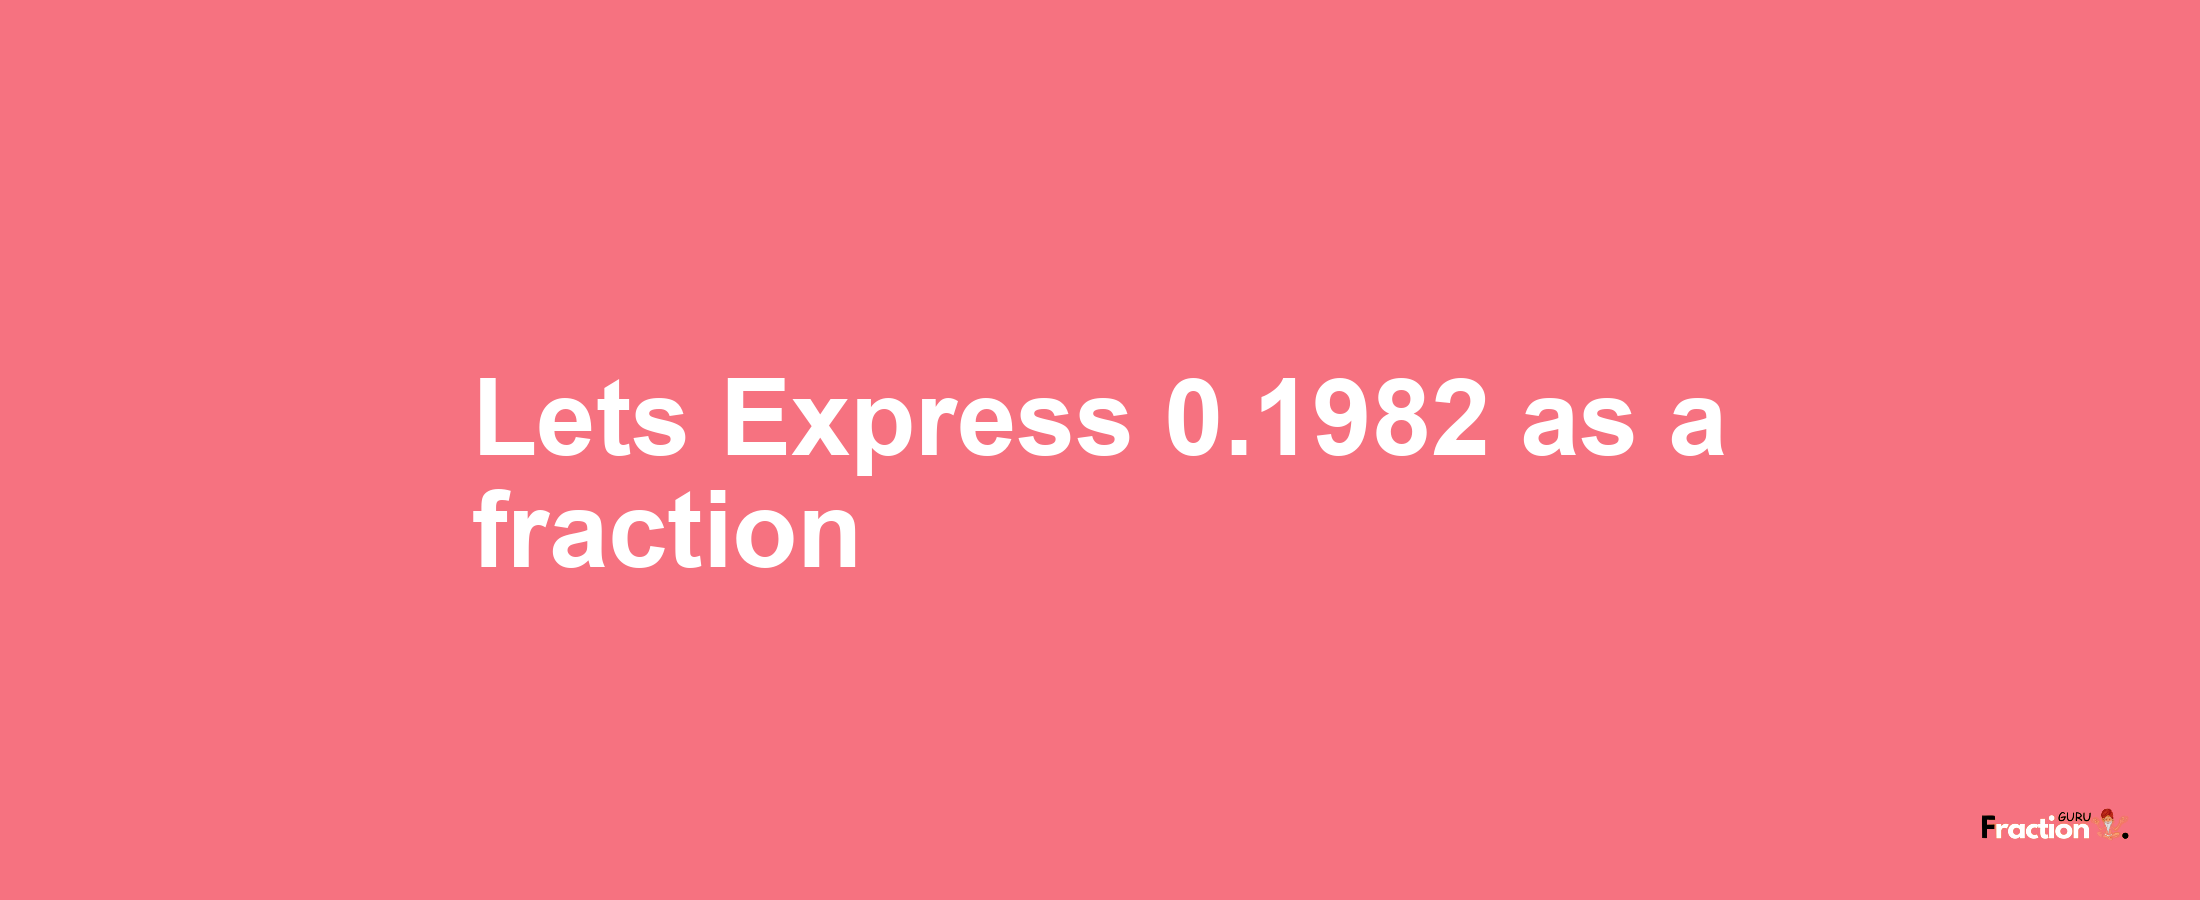 Lets Express 0.1982 as afraction